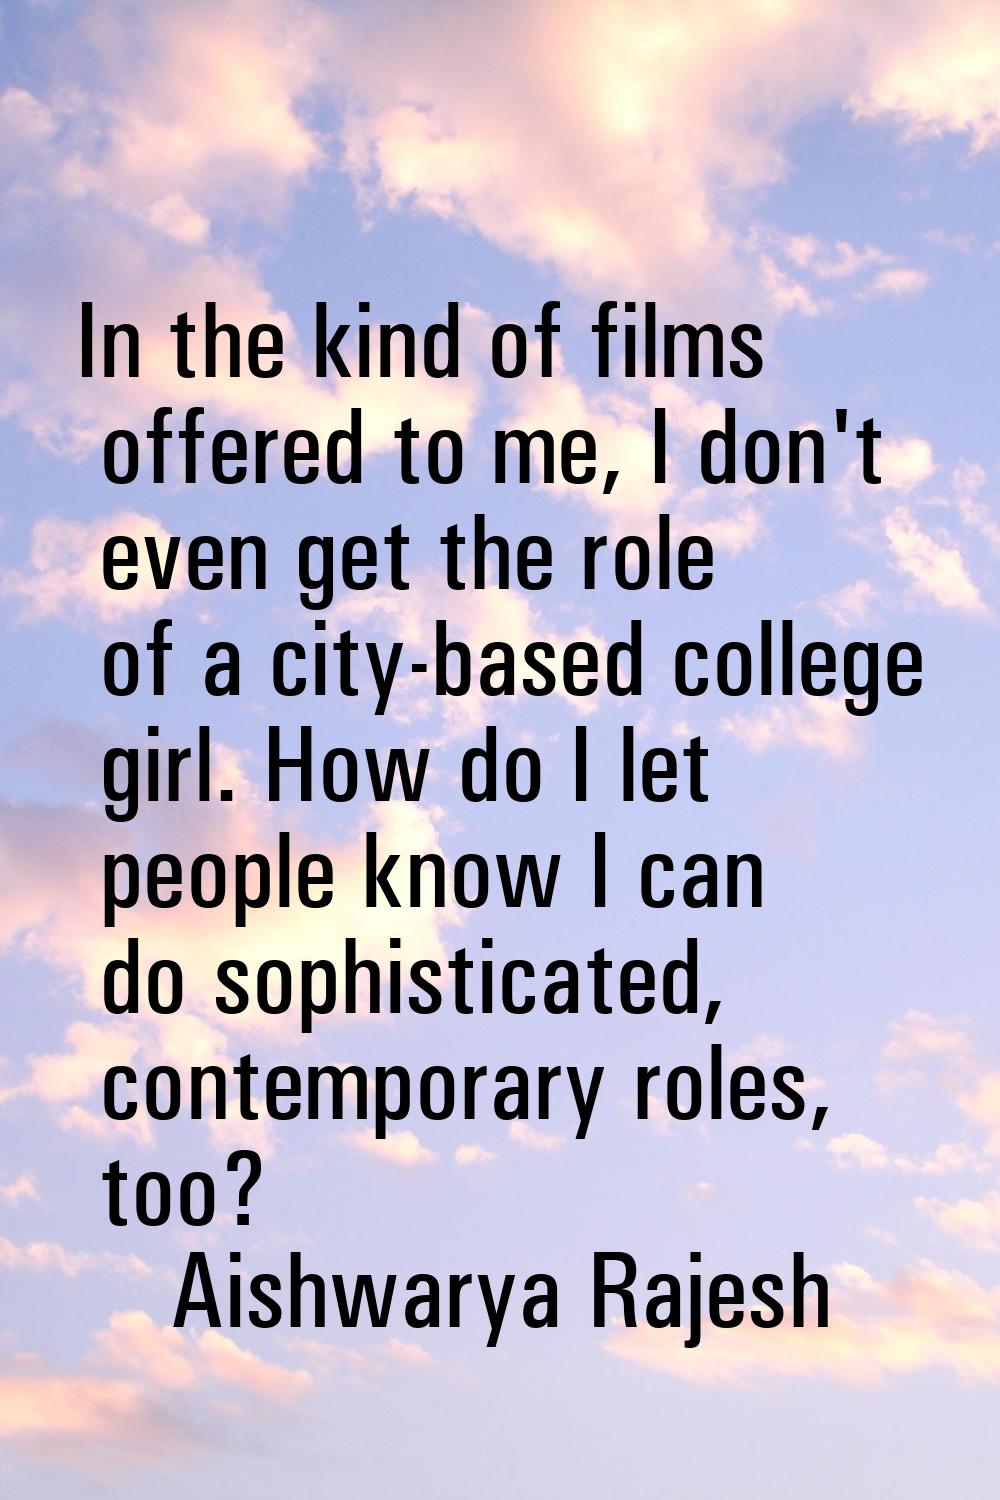 In the kind of films offered to me, I don't even get the role of a city-based college girl. How do 